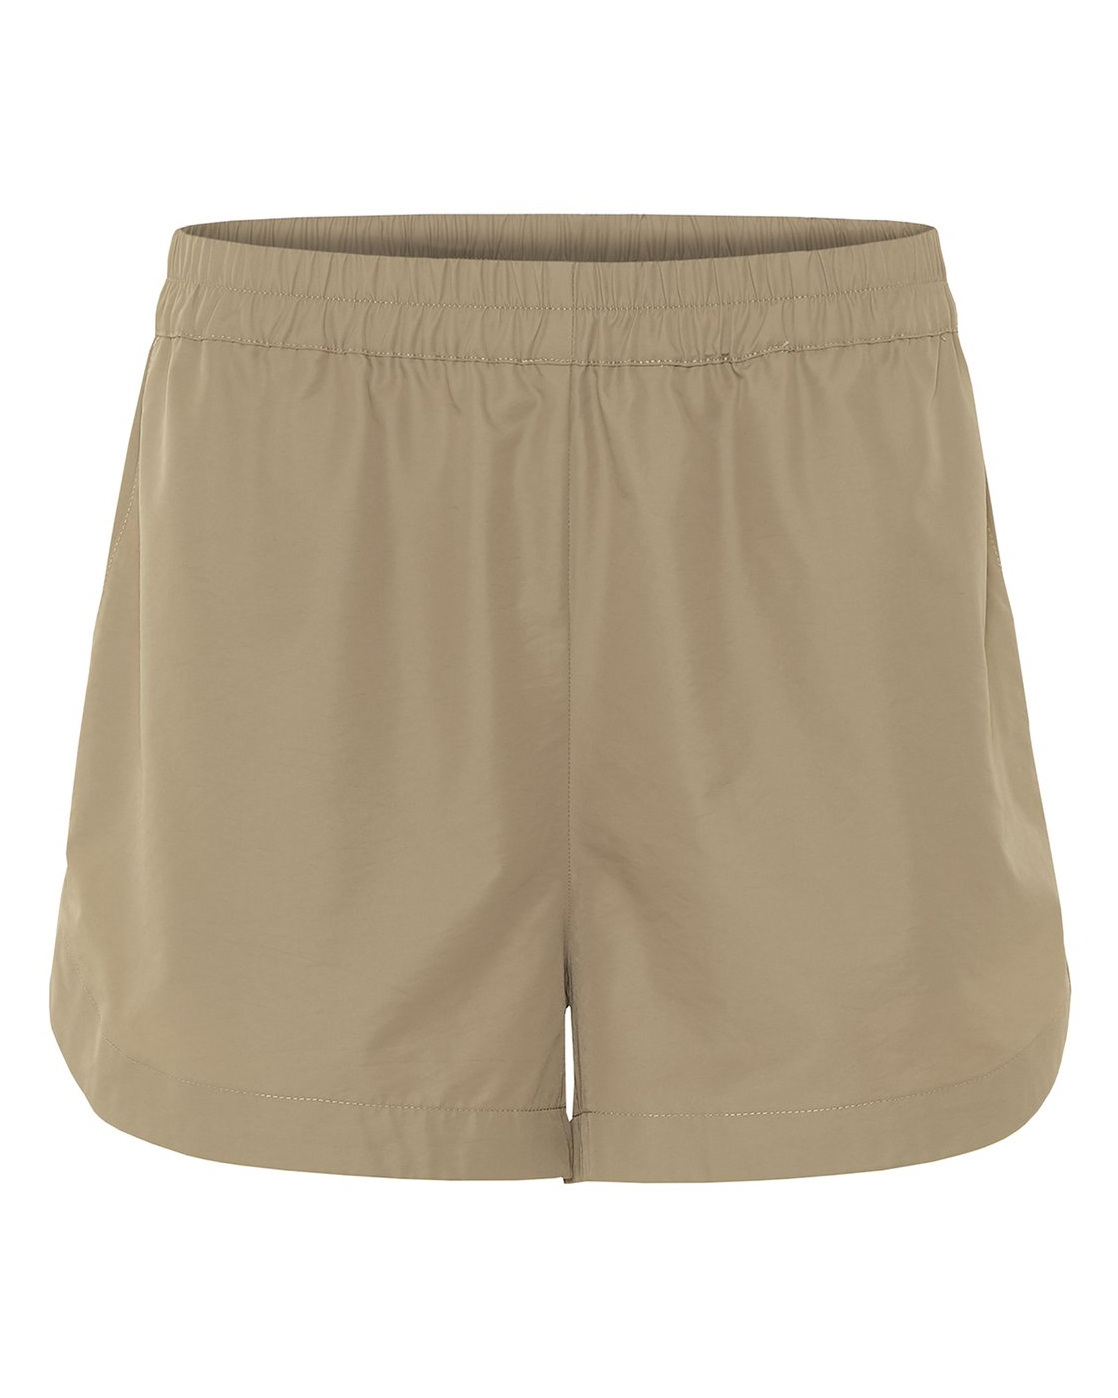 Coras shorts - Light brown - S